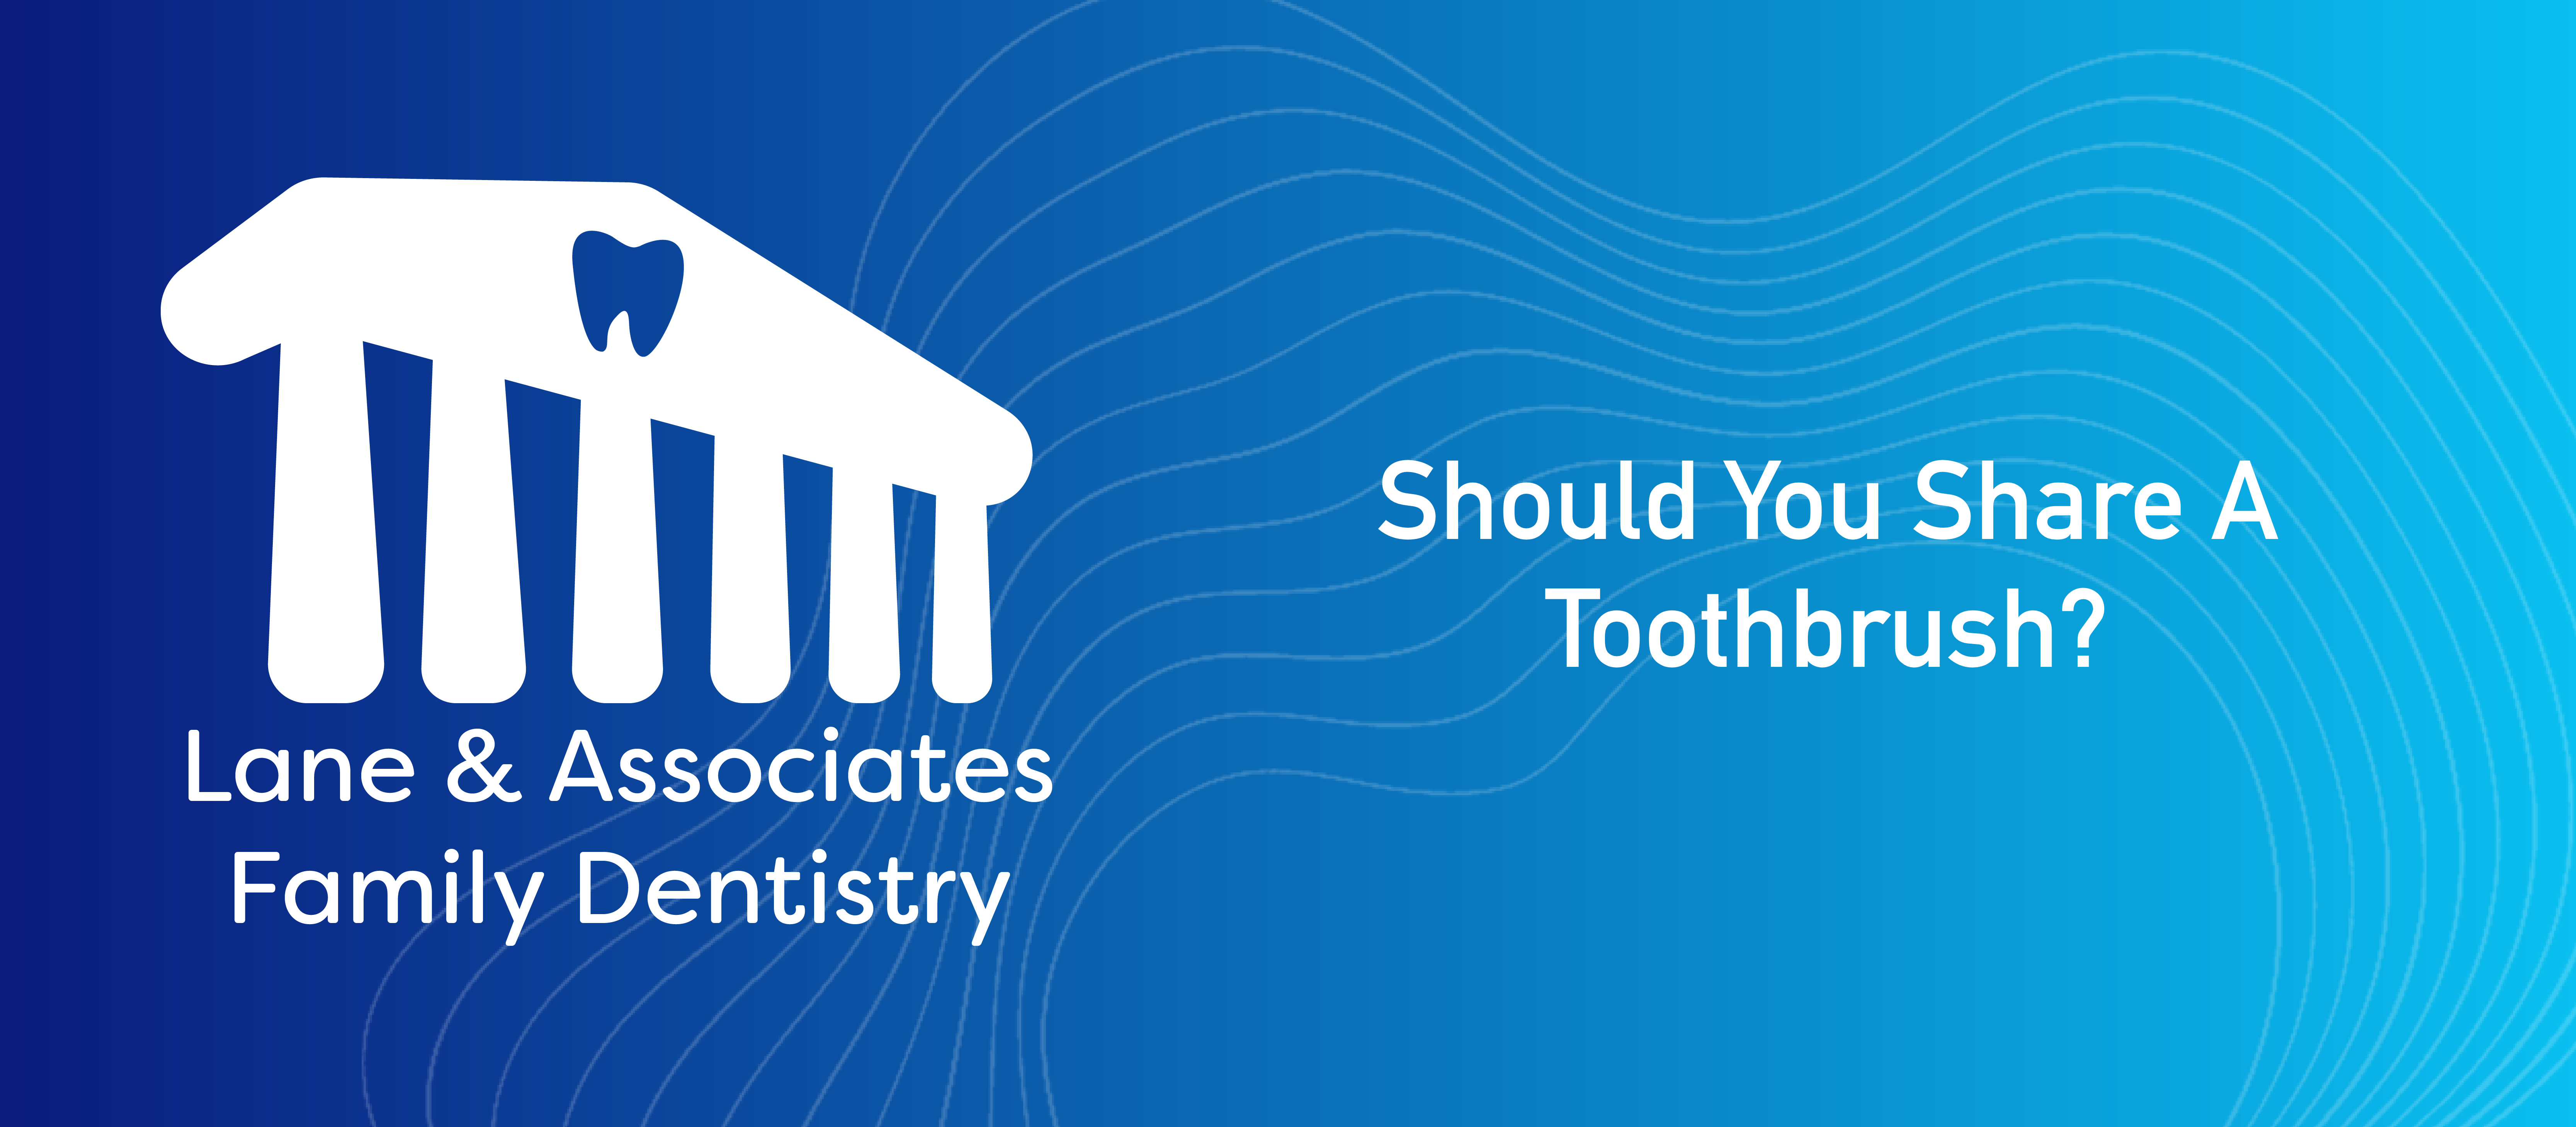 should you share a toothbrush